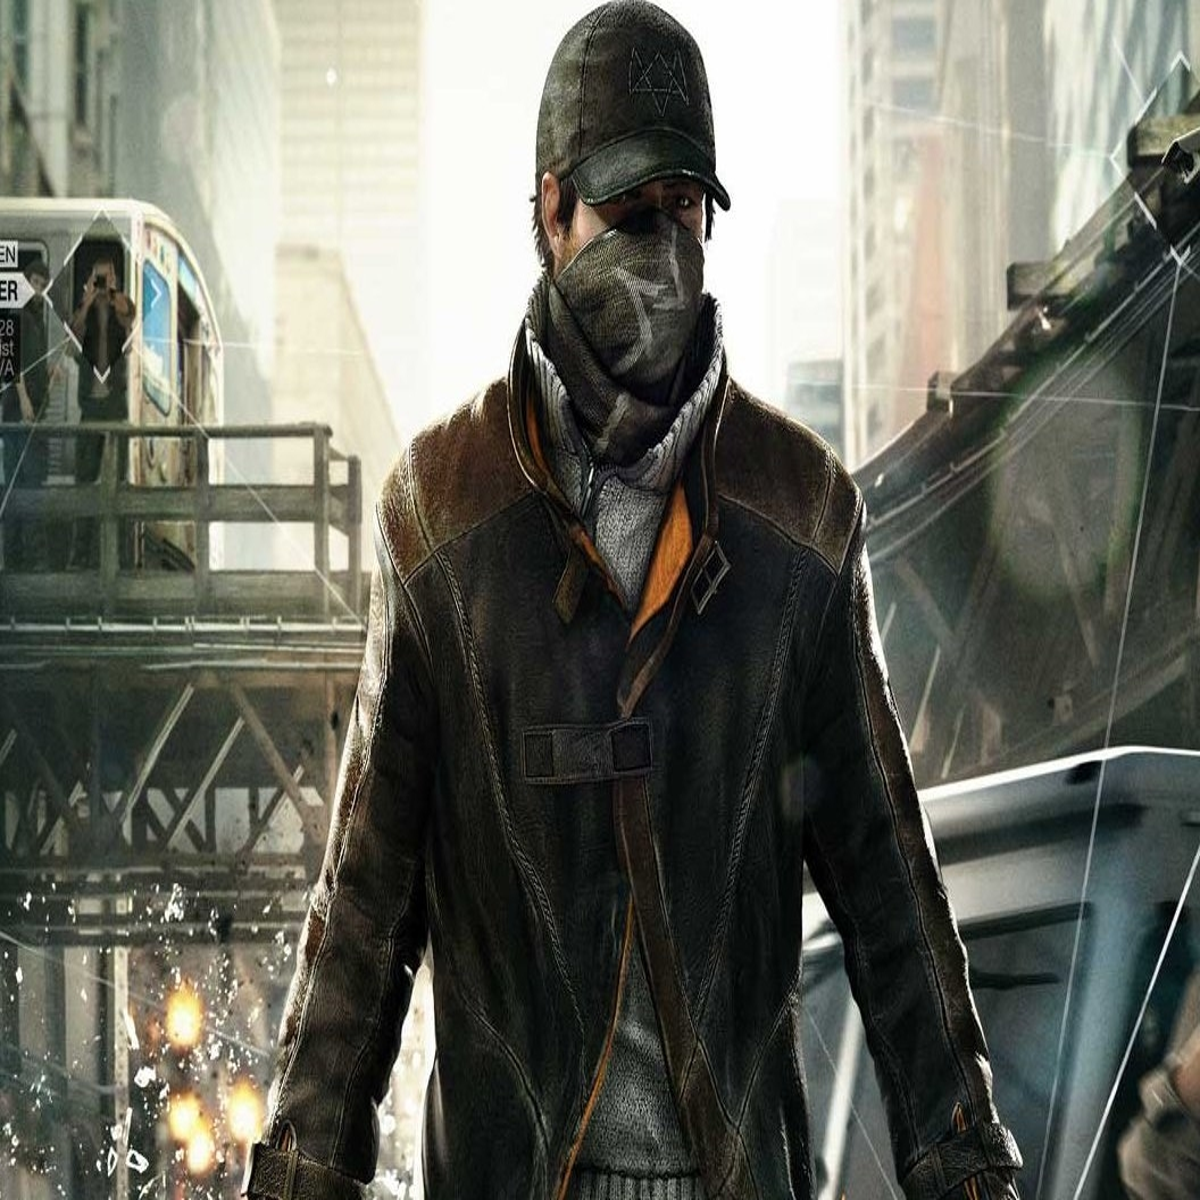 Watch Dogs PS3: has last-gen hardware had its day?